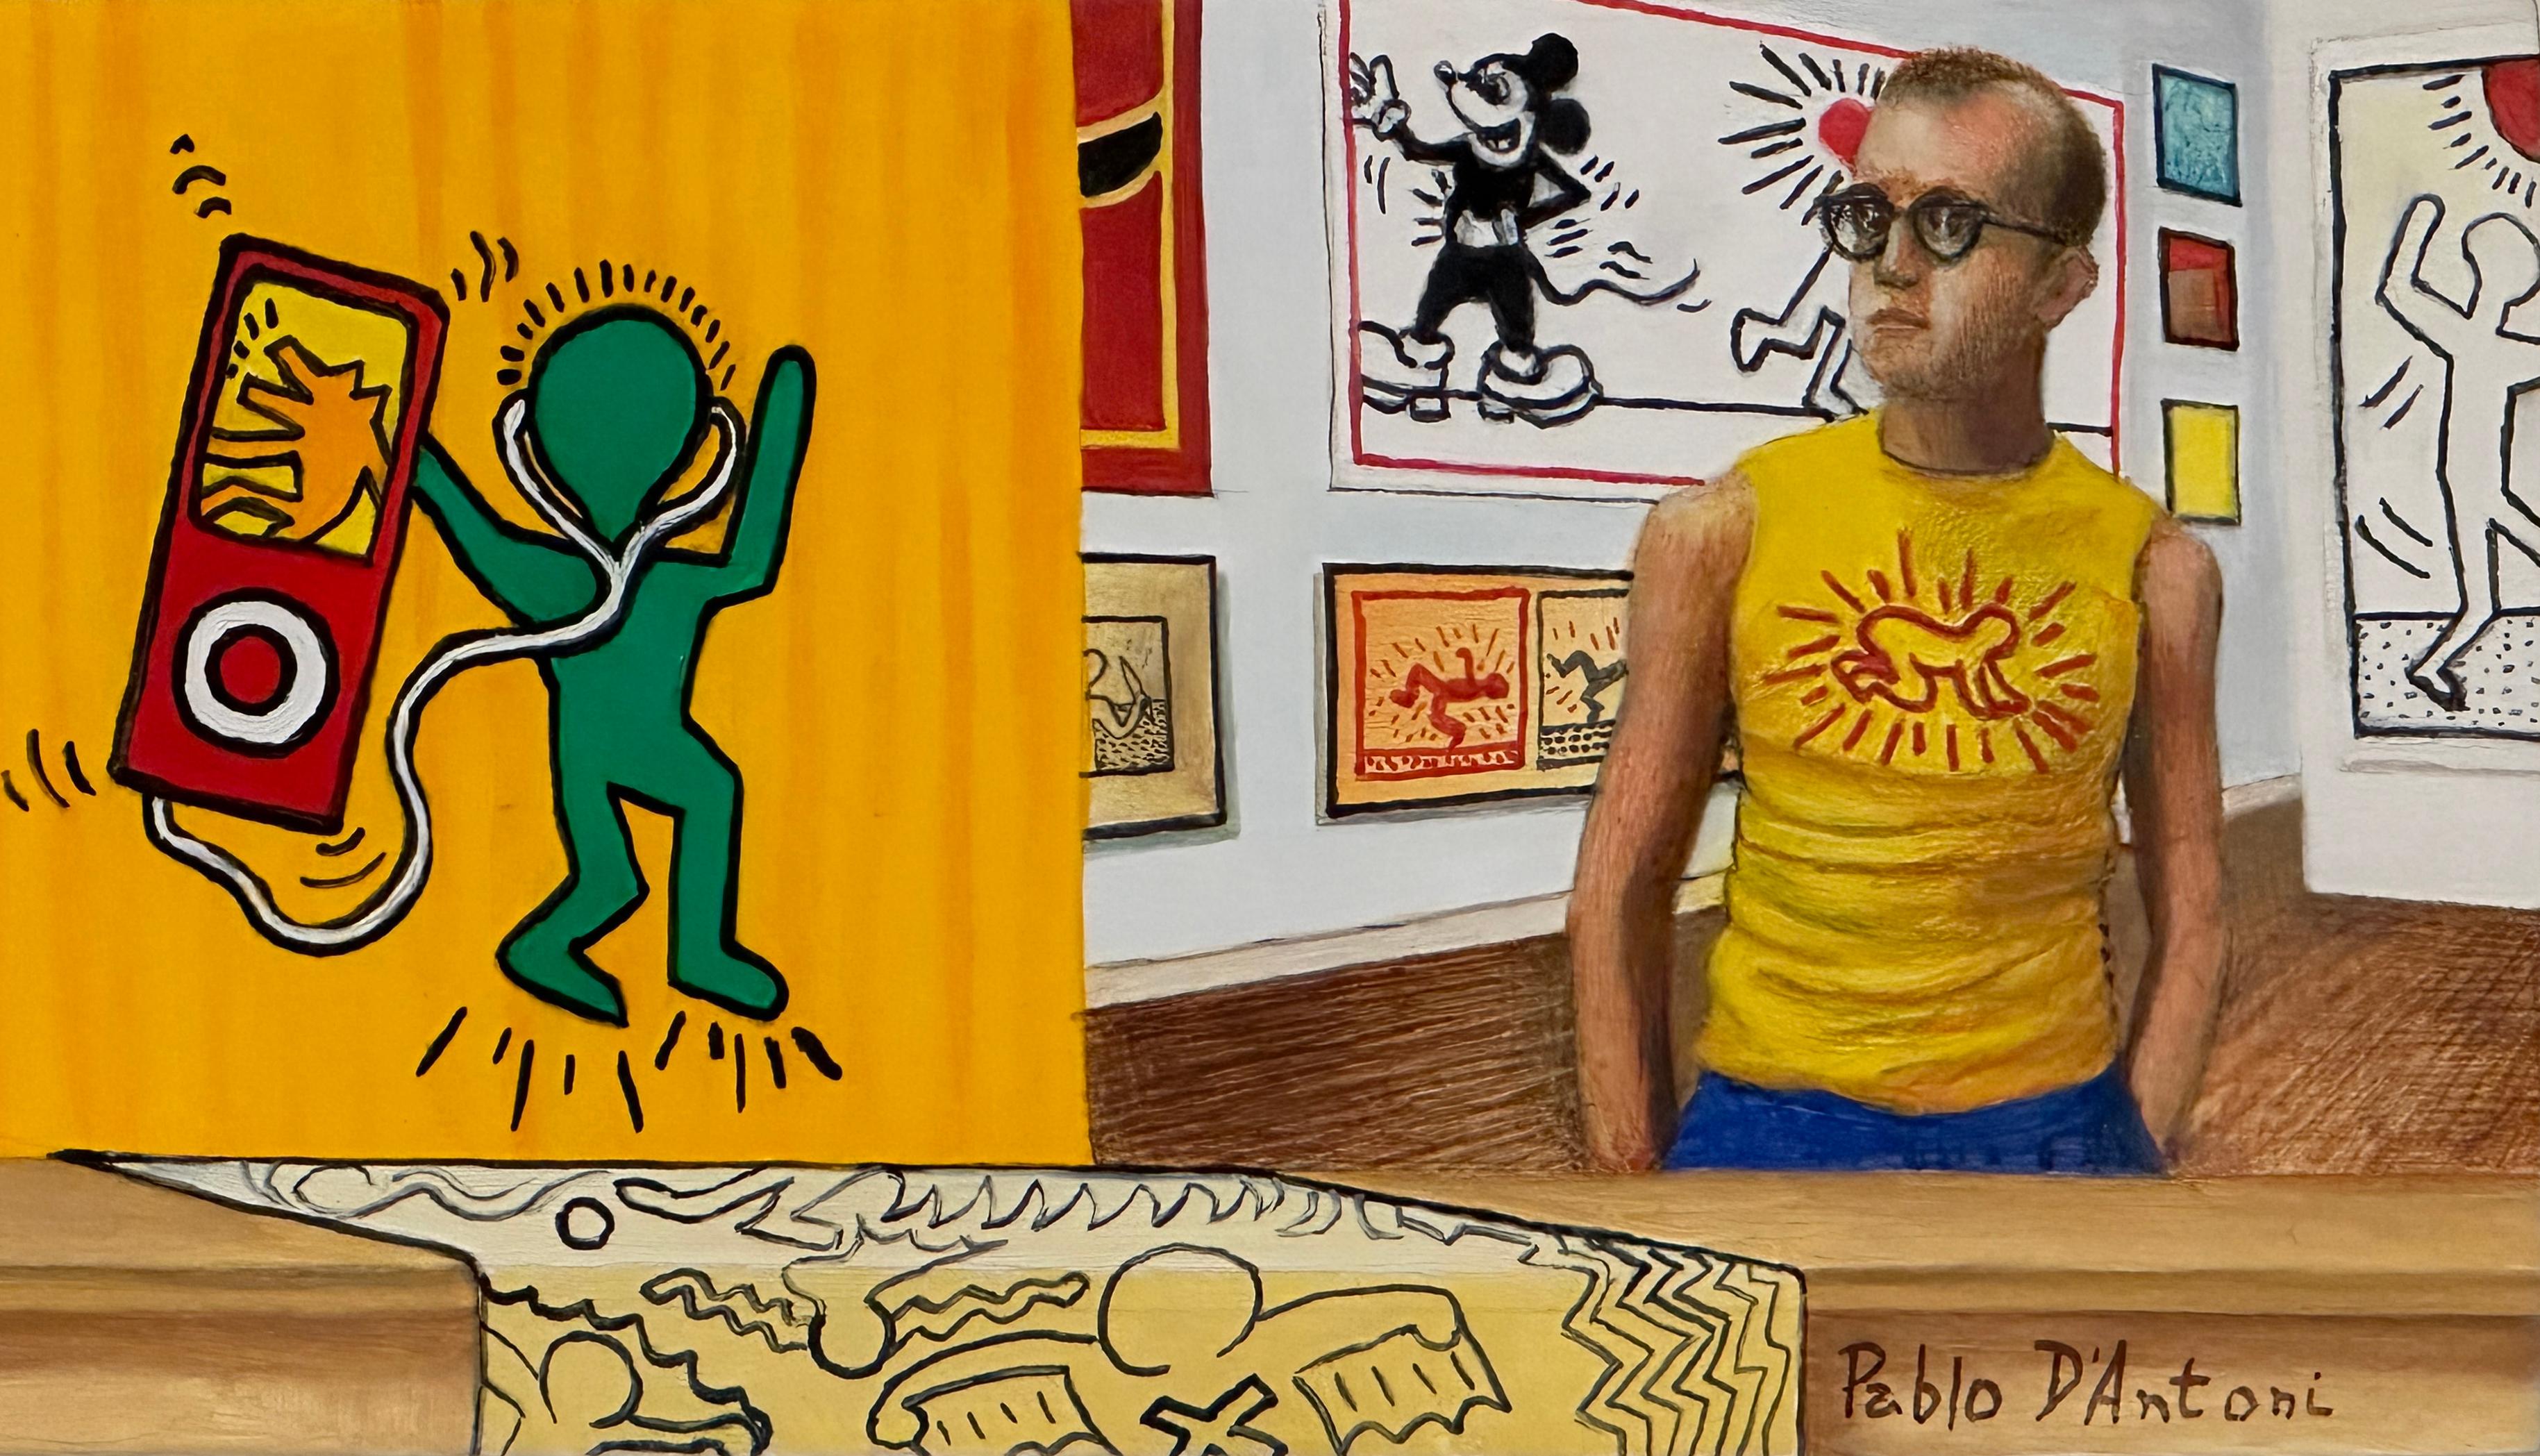 KEITHIAN THOUGHTS II - Contemporary, Miniature, Keith Haring, Realism - Painting by Pablo D'Antoni